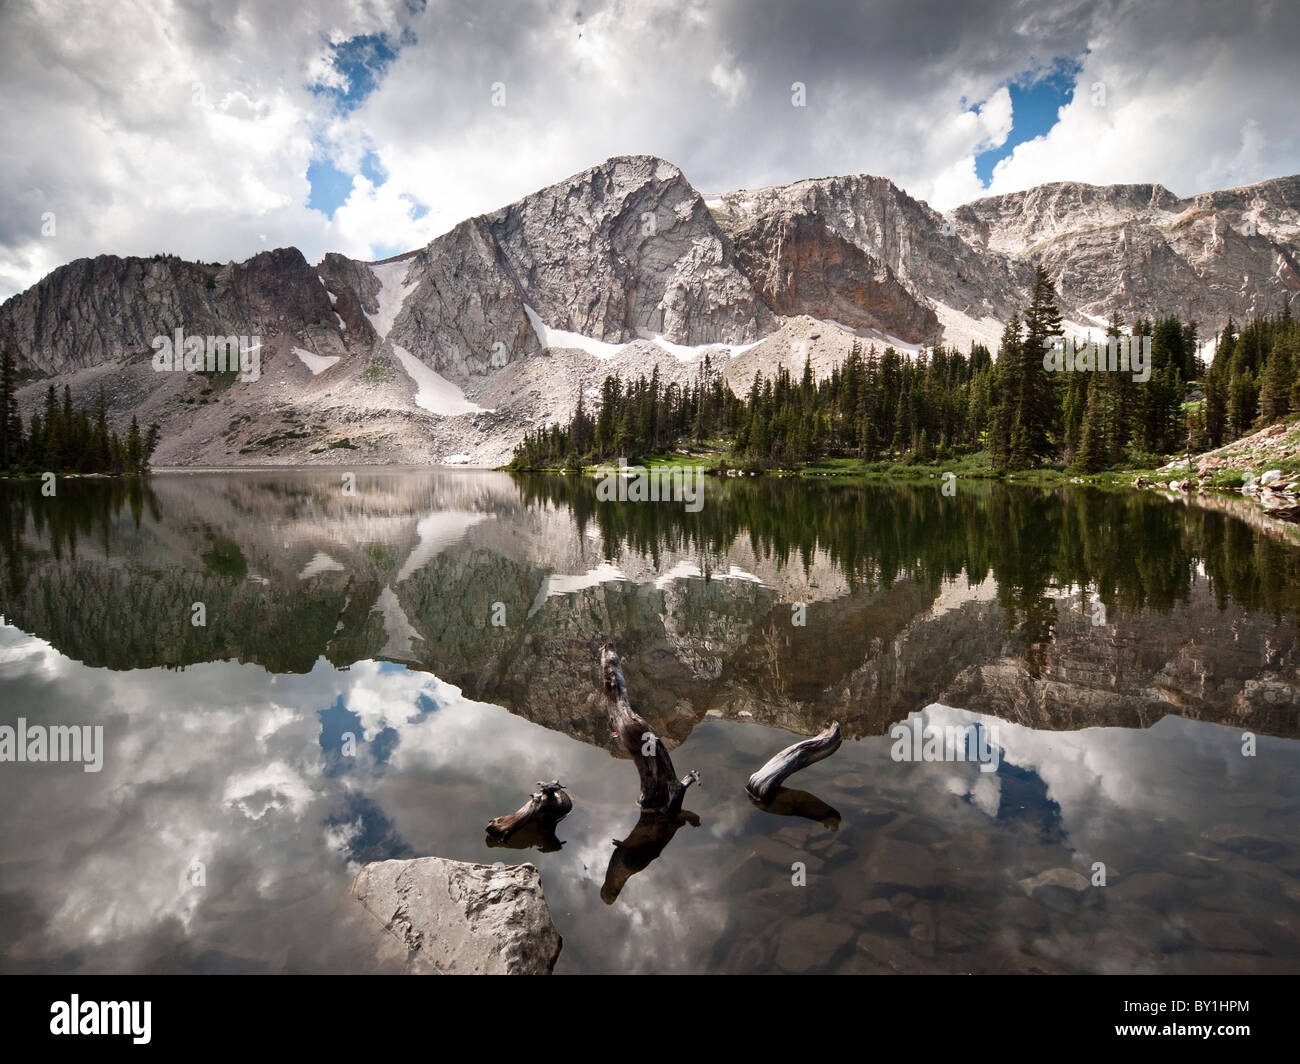 Il lago a Marie Medicine Bow Mountain National Forest, Wyoming parco nazionale Foto Stock